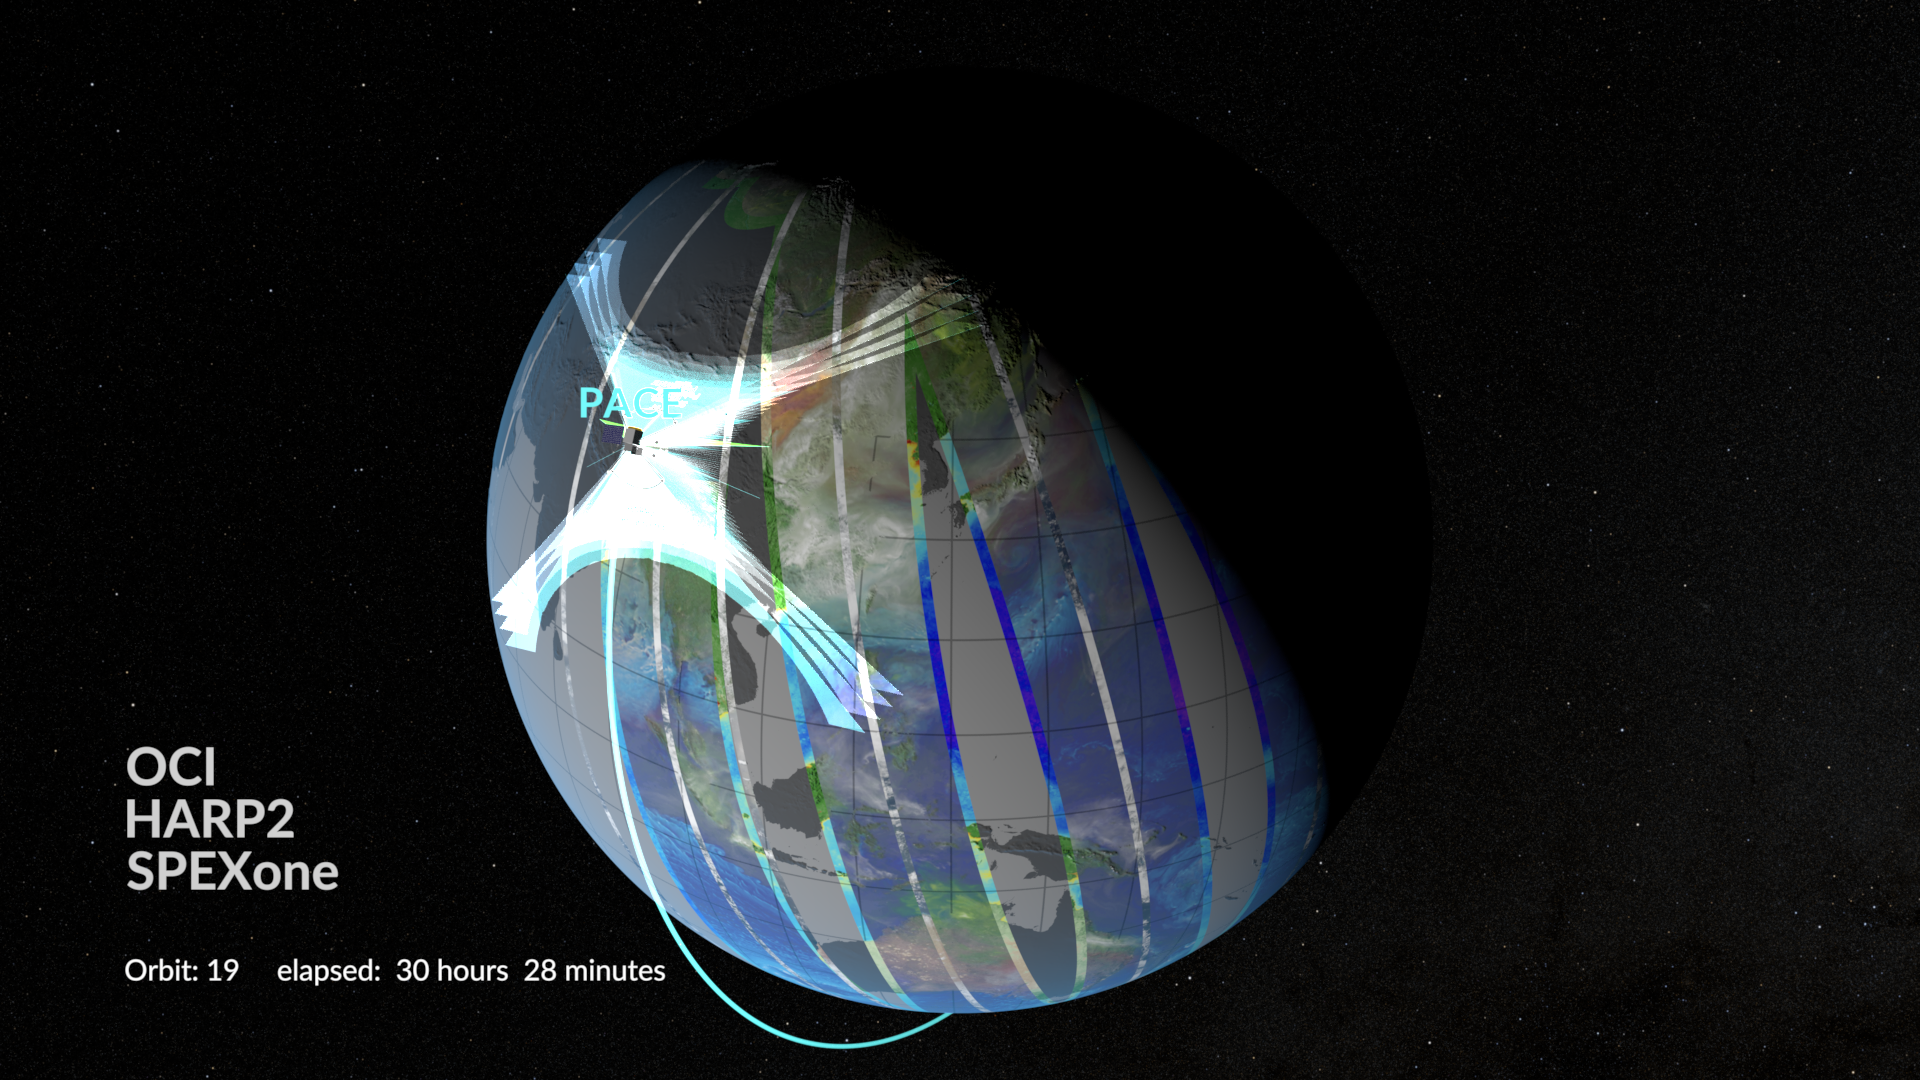 PACE orbiting the Earth showing OCI, HARP2, and SPEXone instument fields of view followed by instrument ground swath patterns